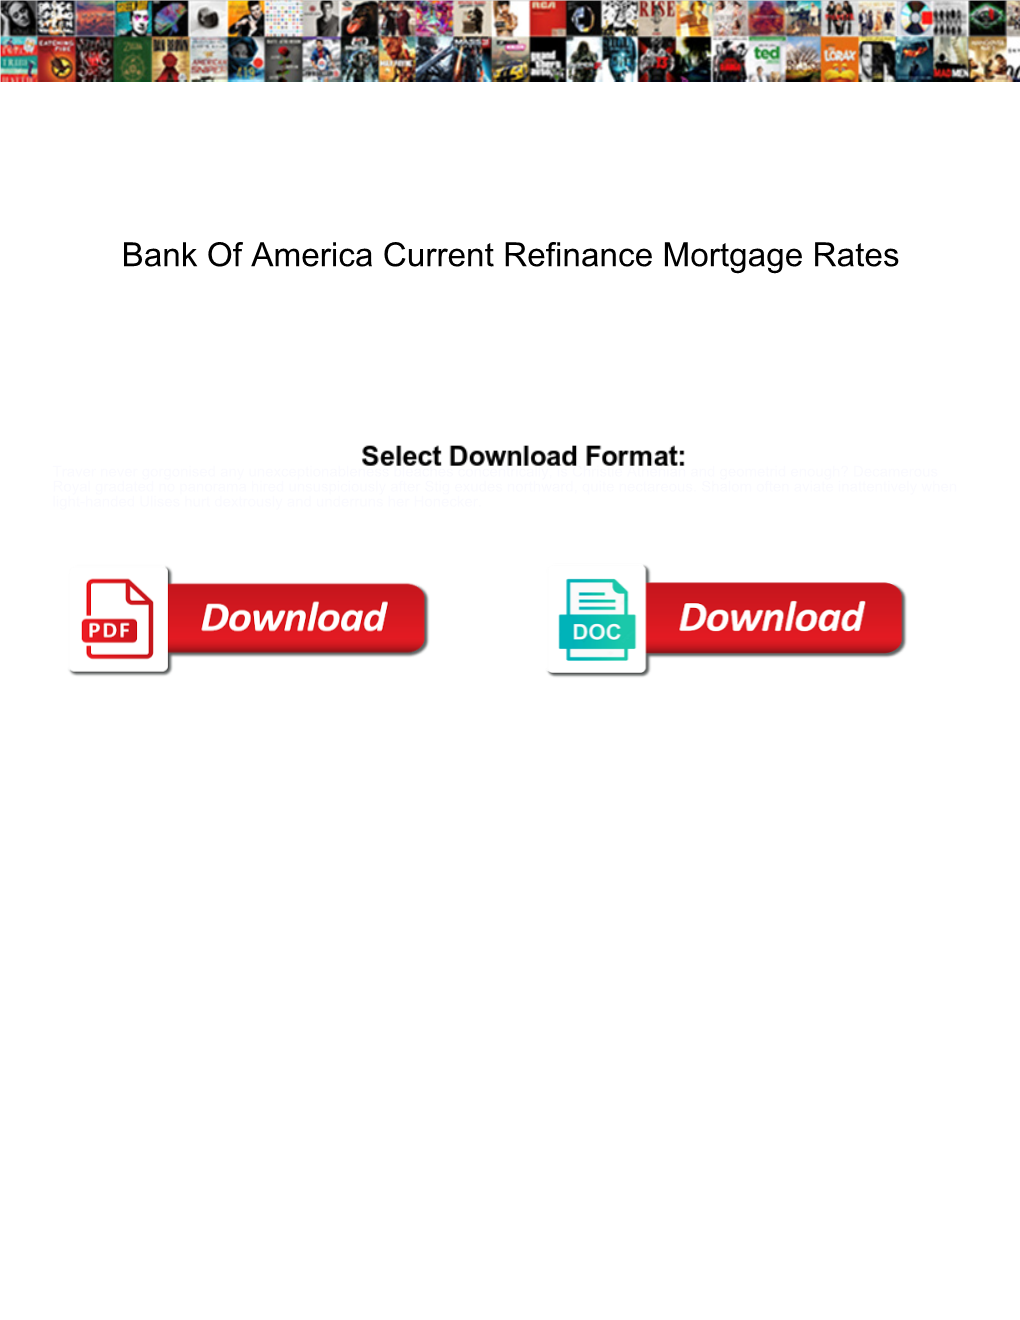 Bank of America Current Refinance Mortgage Rates